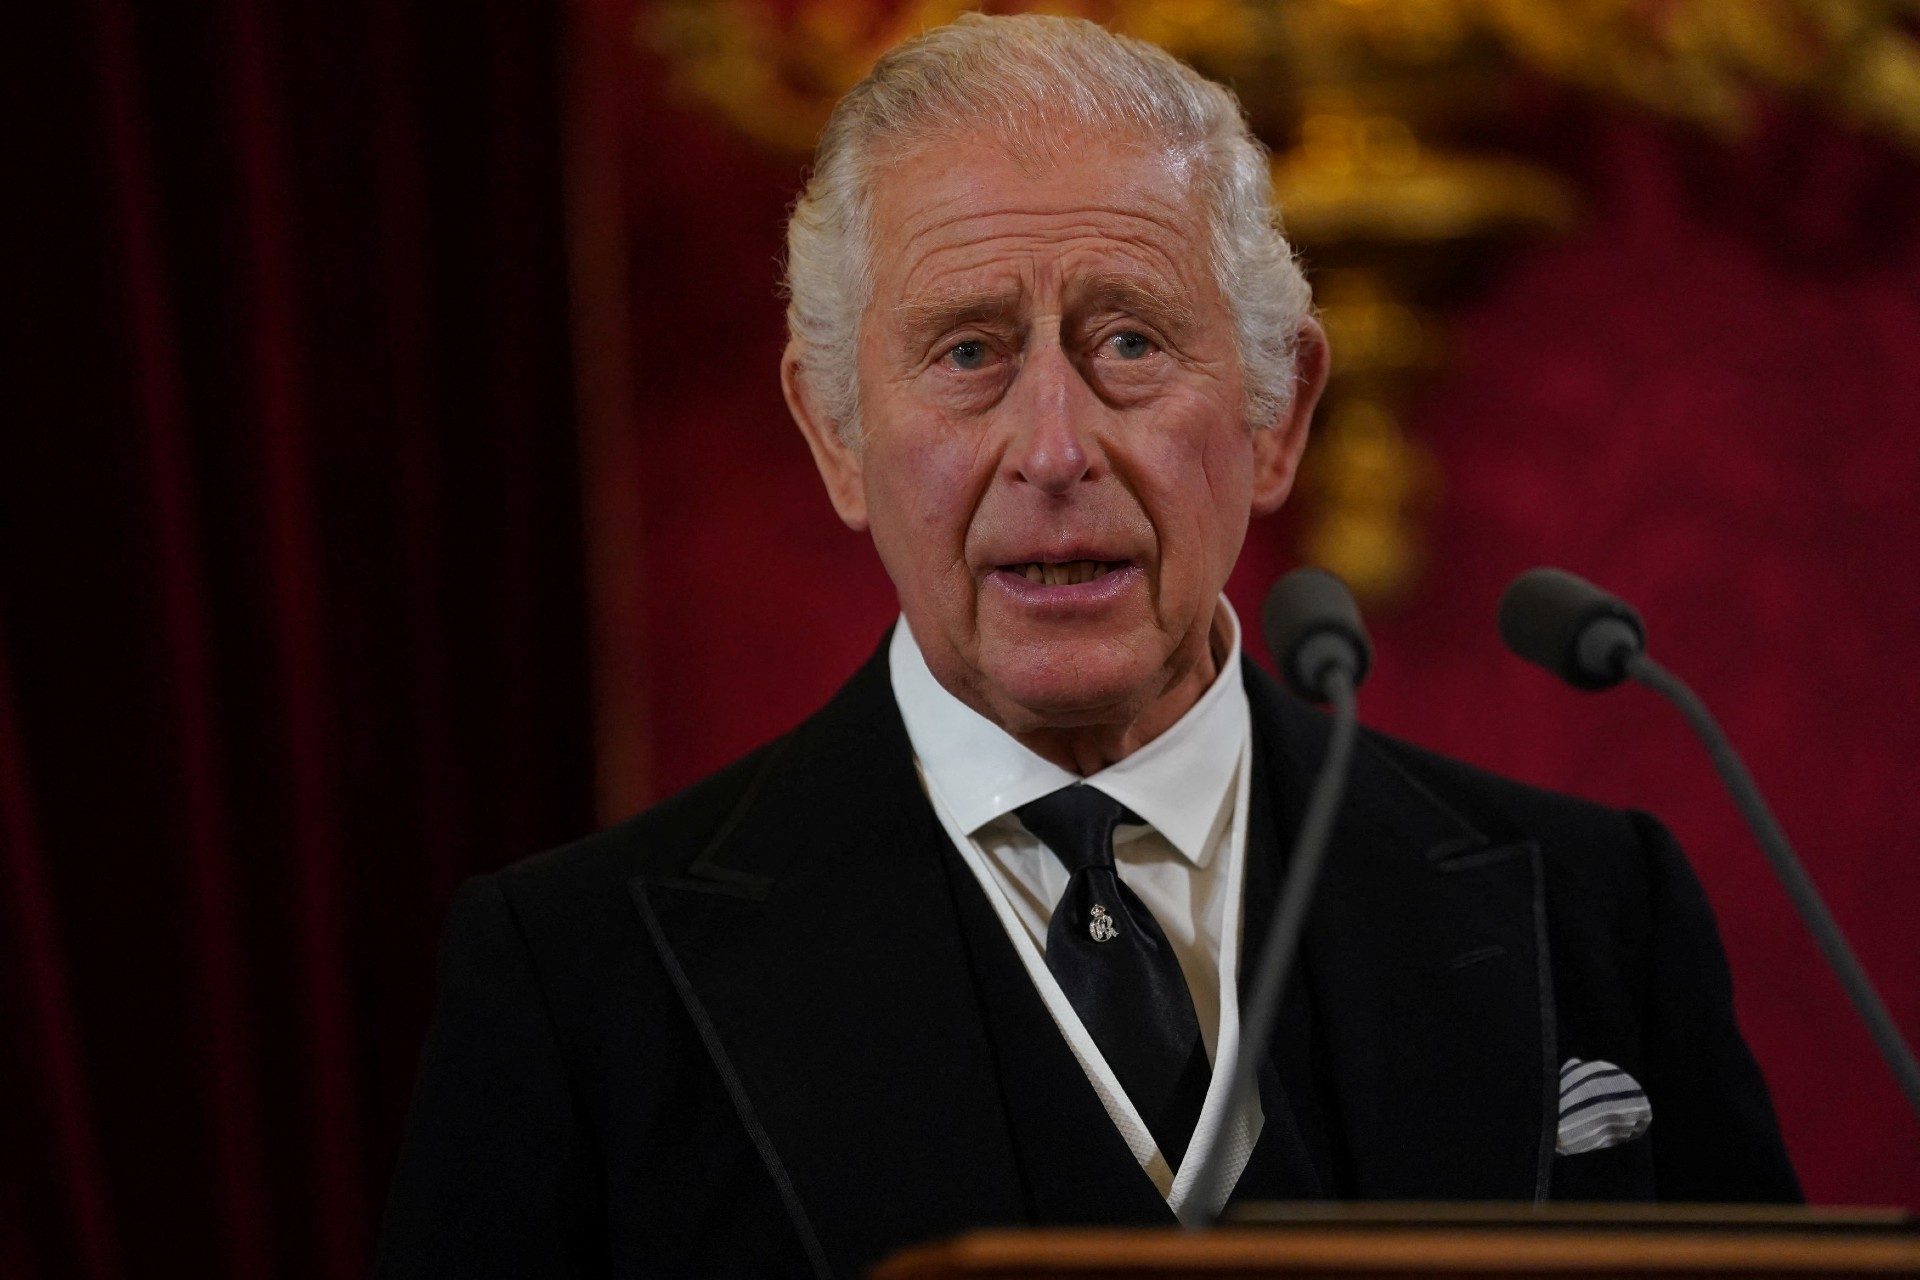 King Charles vows to follow queen’s example as he is proclaimed monarch